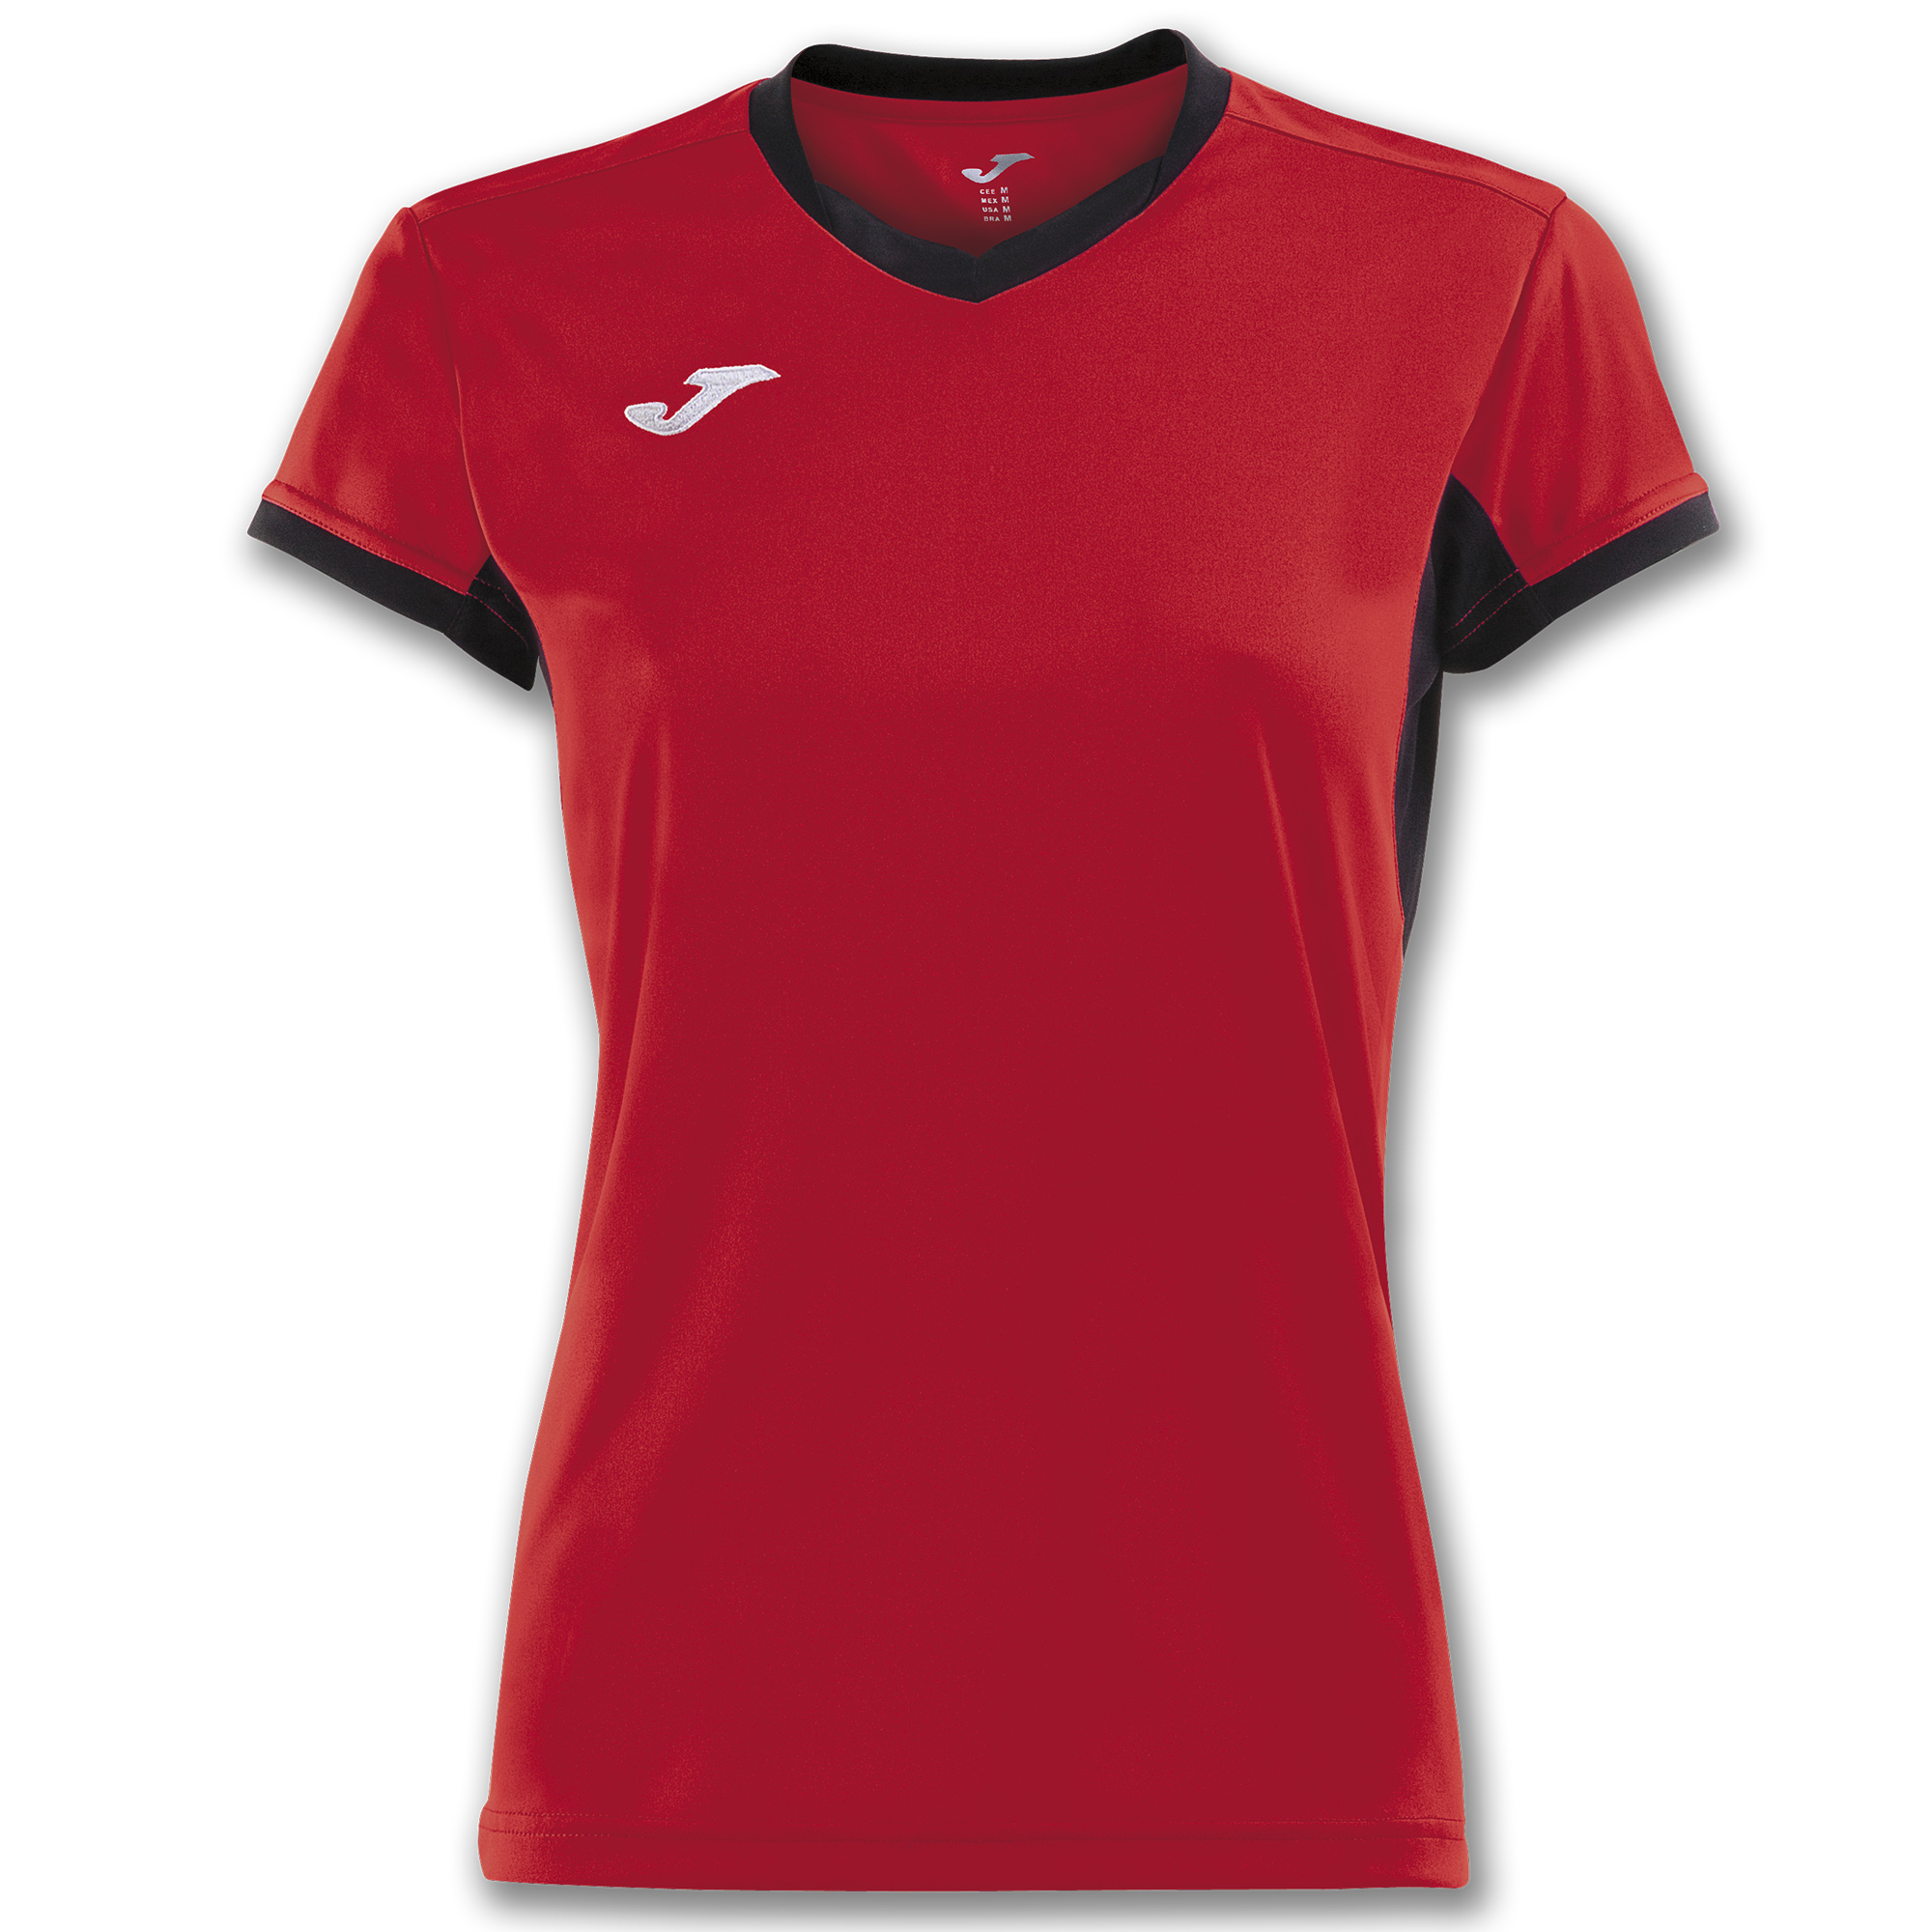 red and black t shirt women's